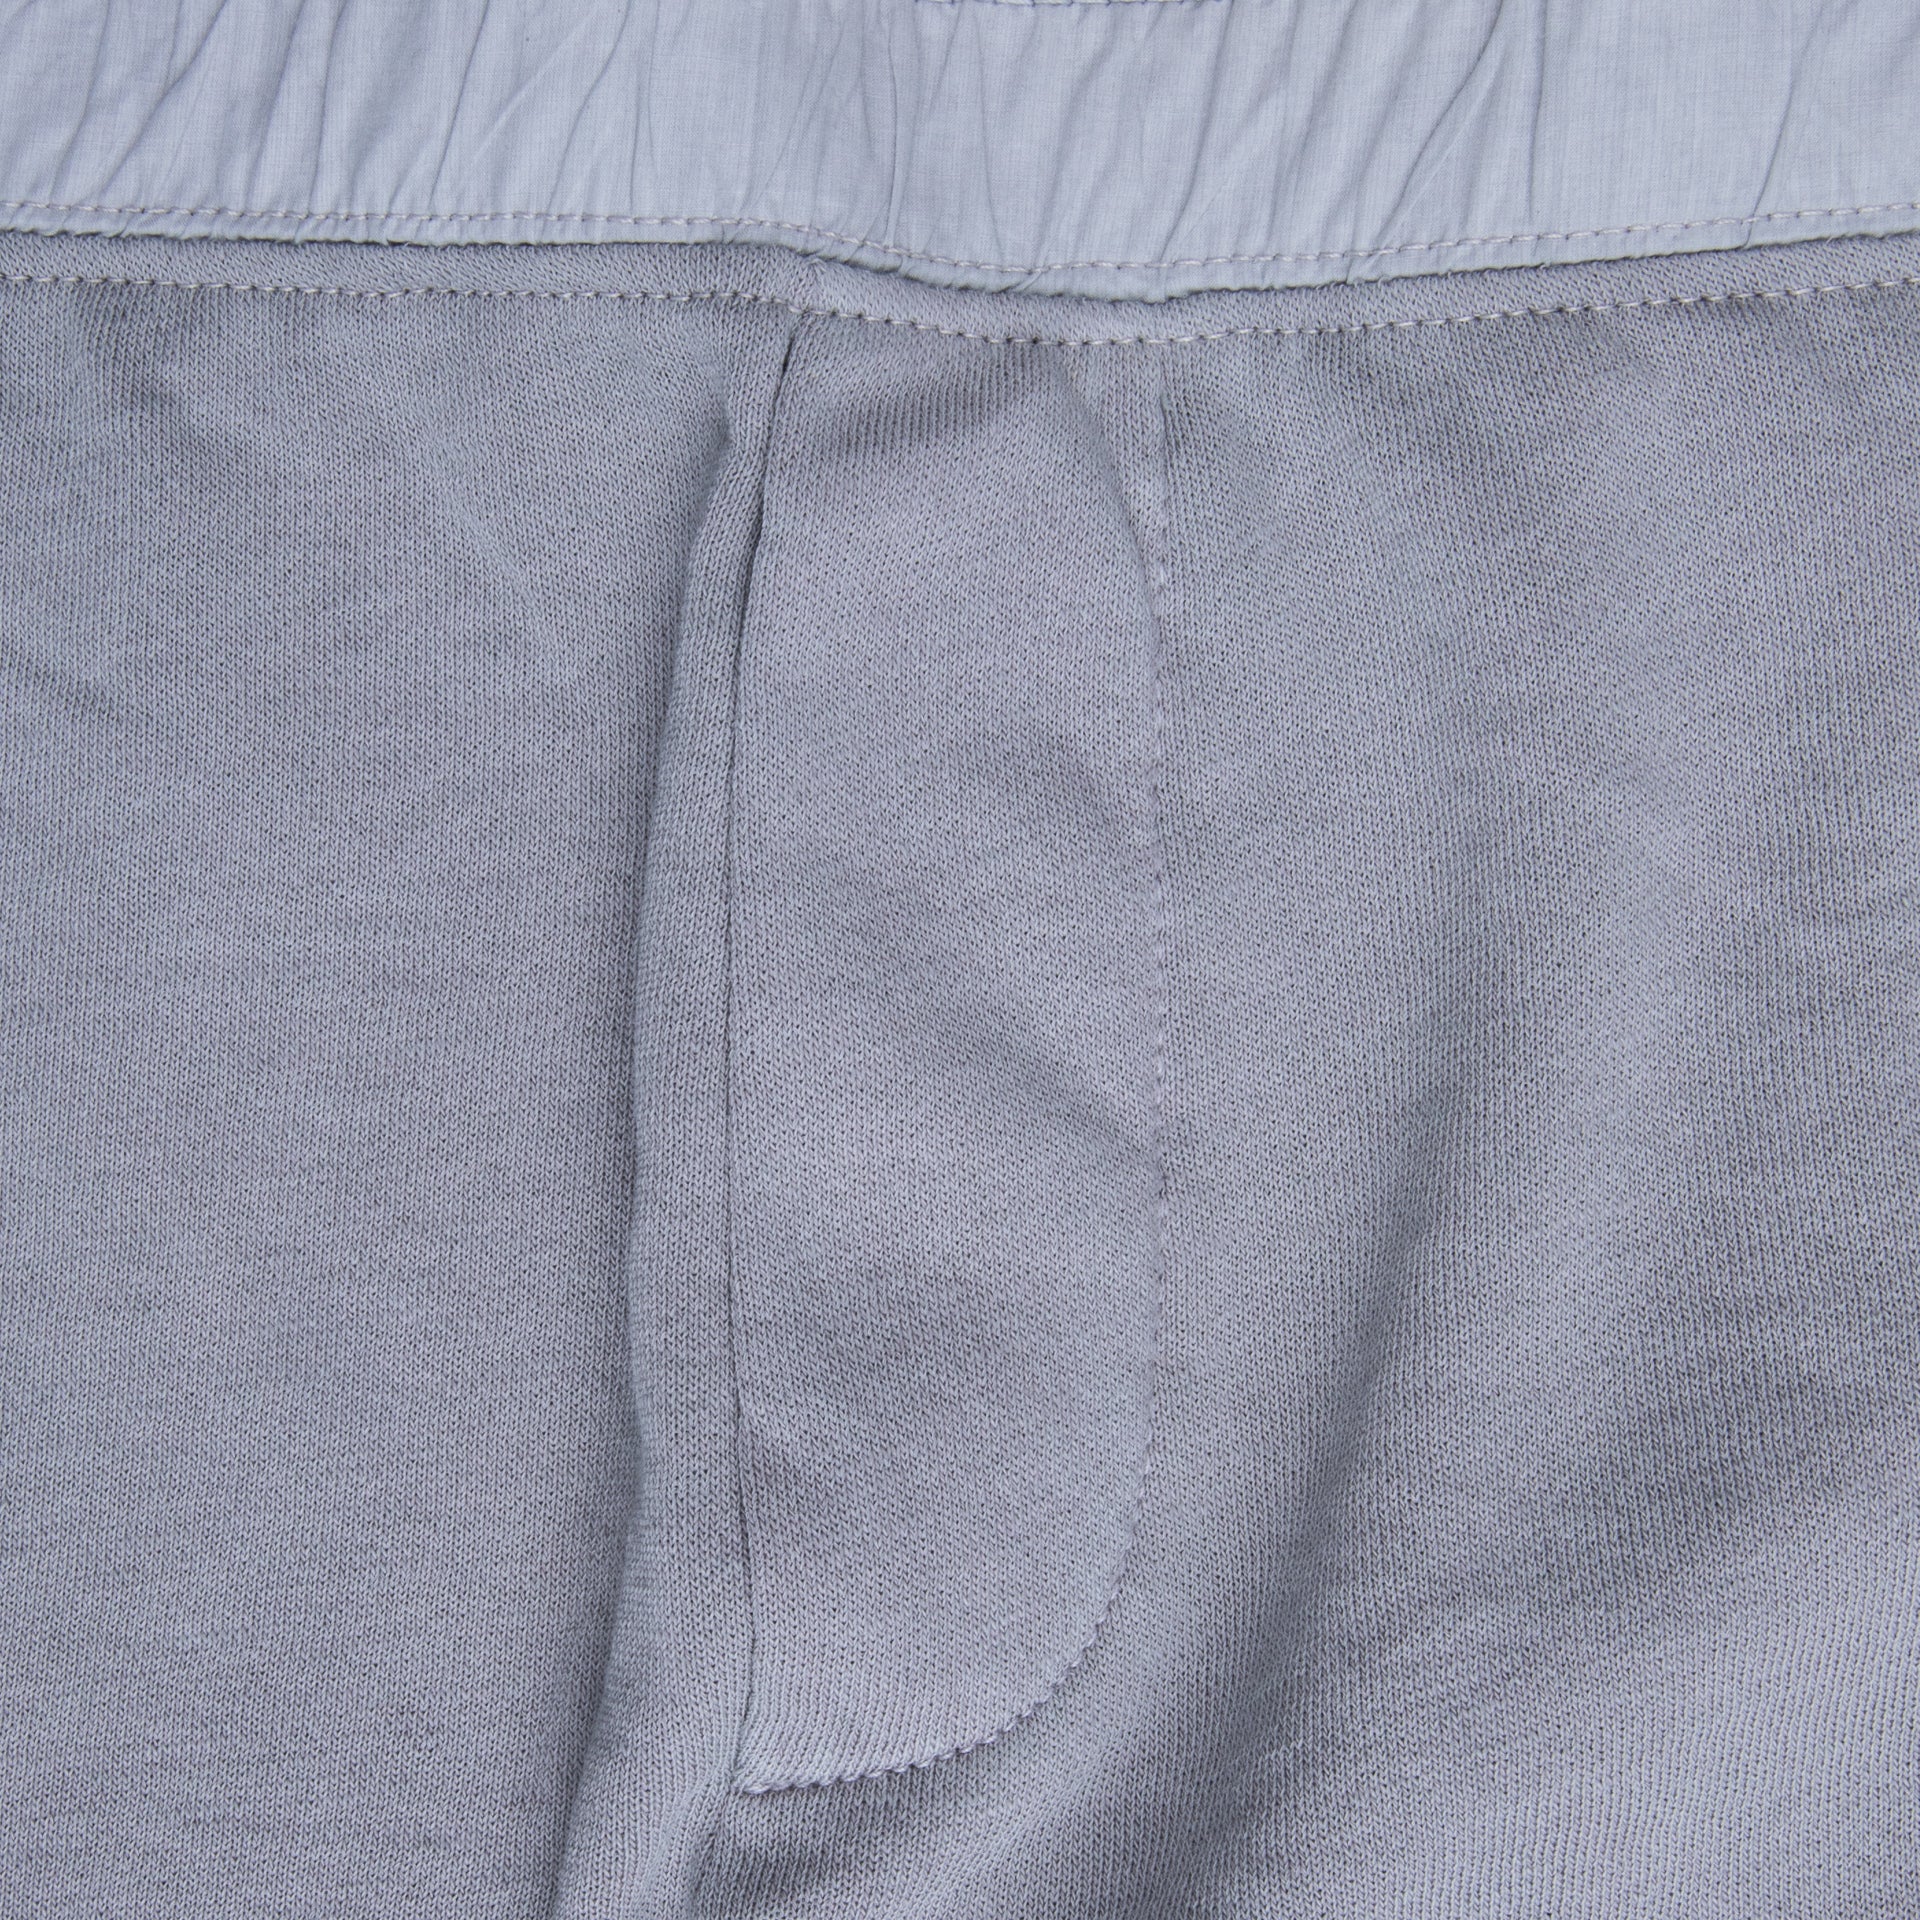 James Perse French Terry Sweat Pants Fog